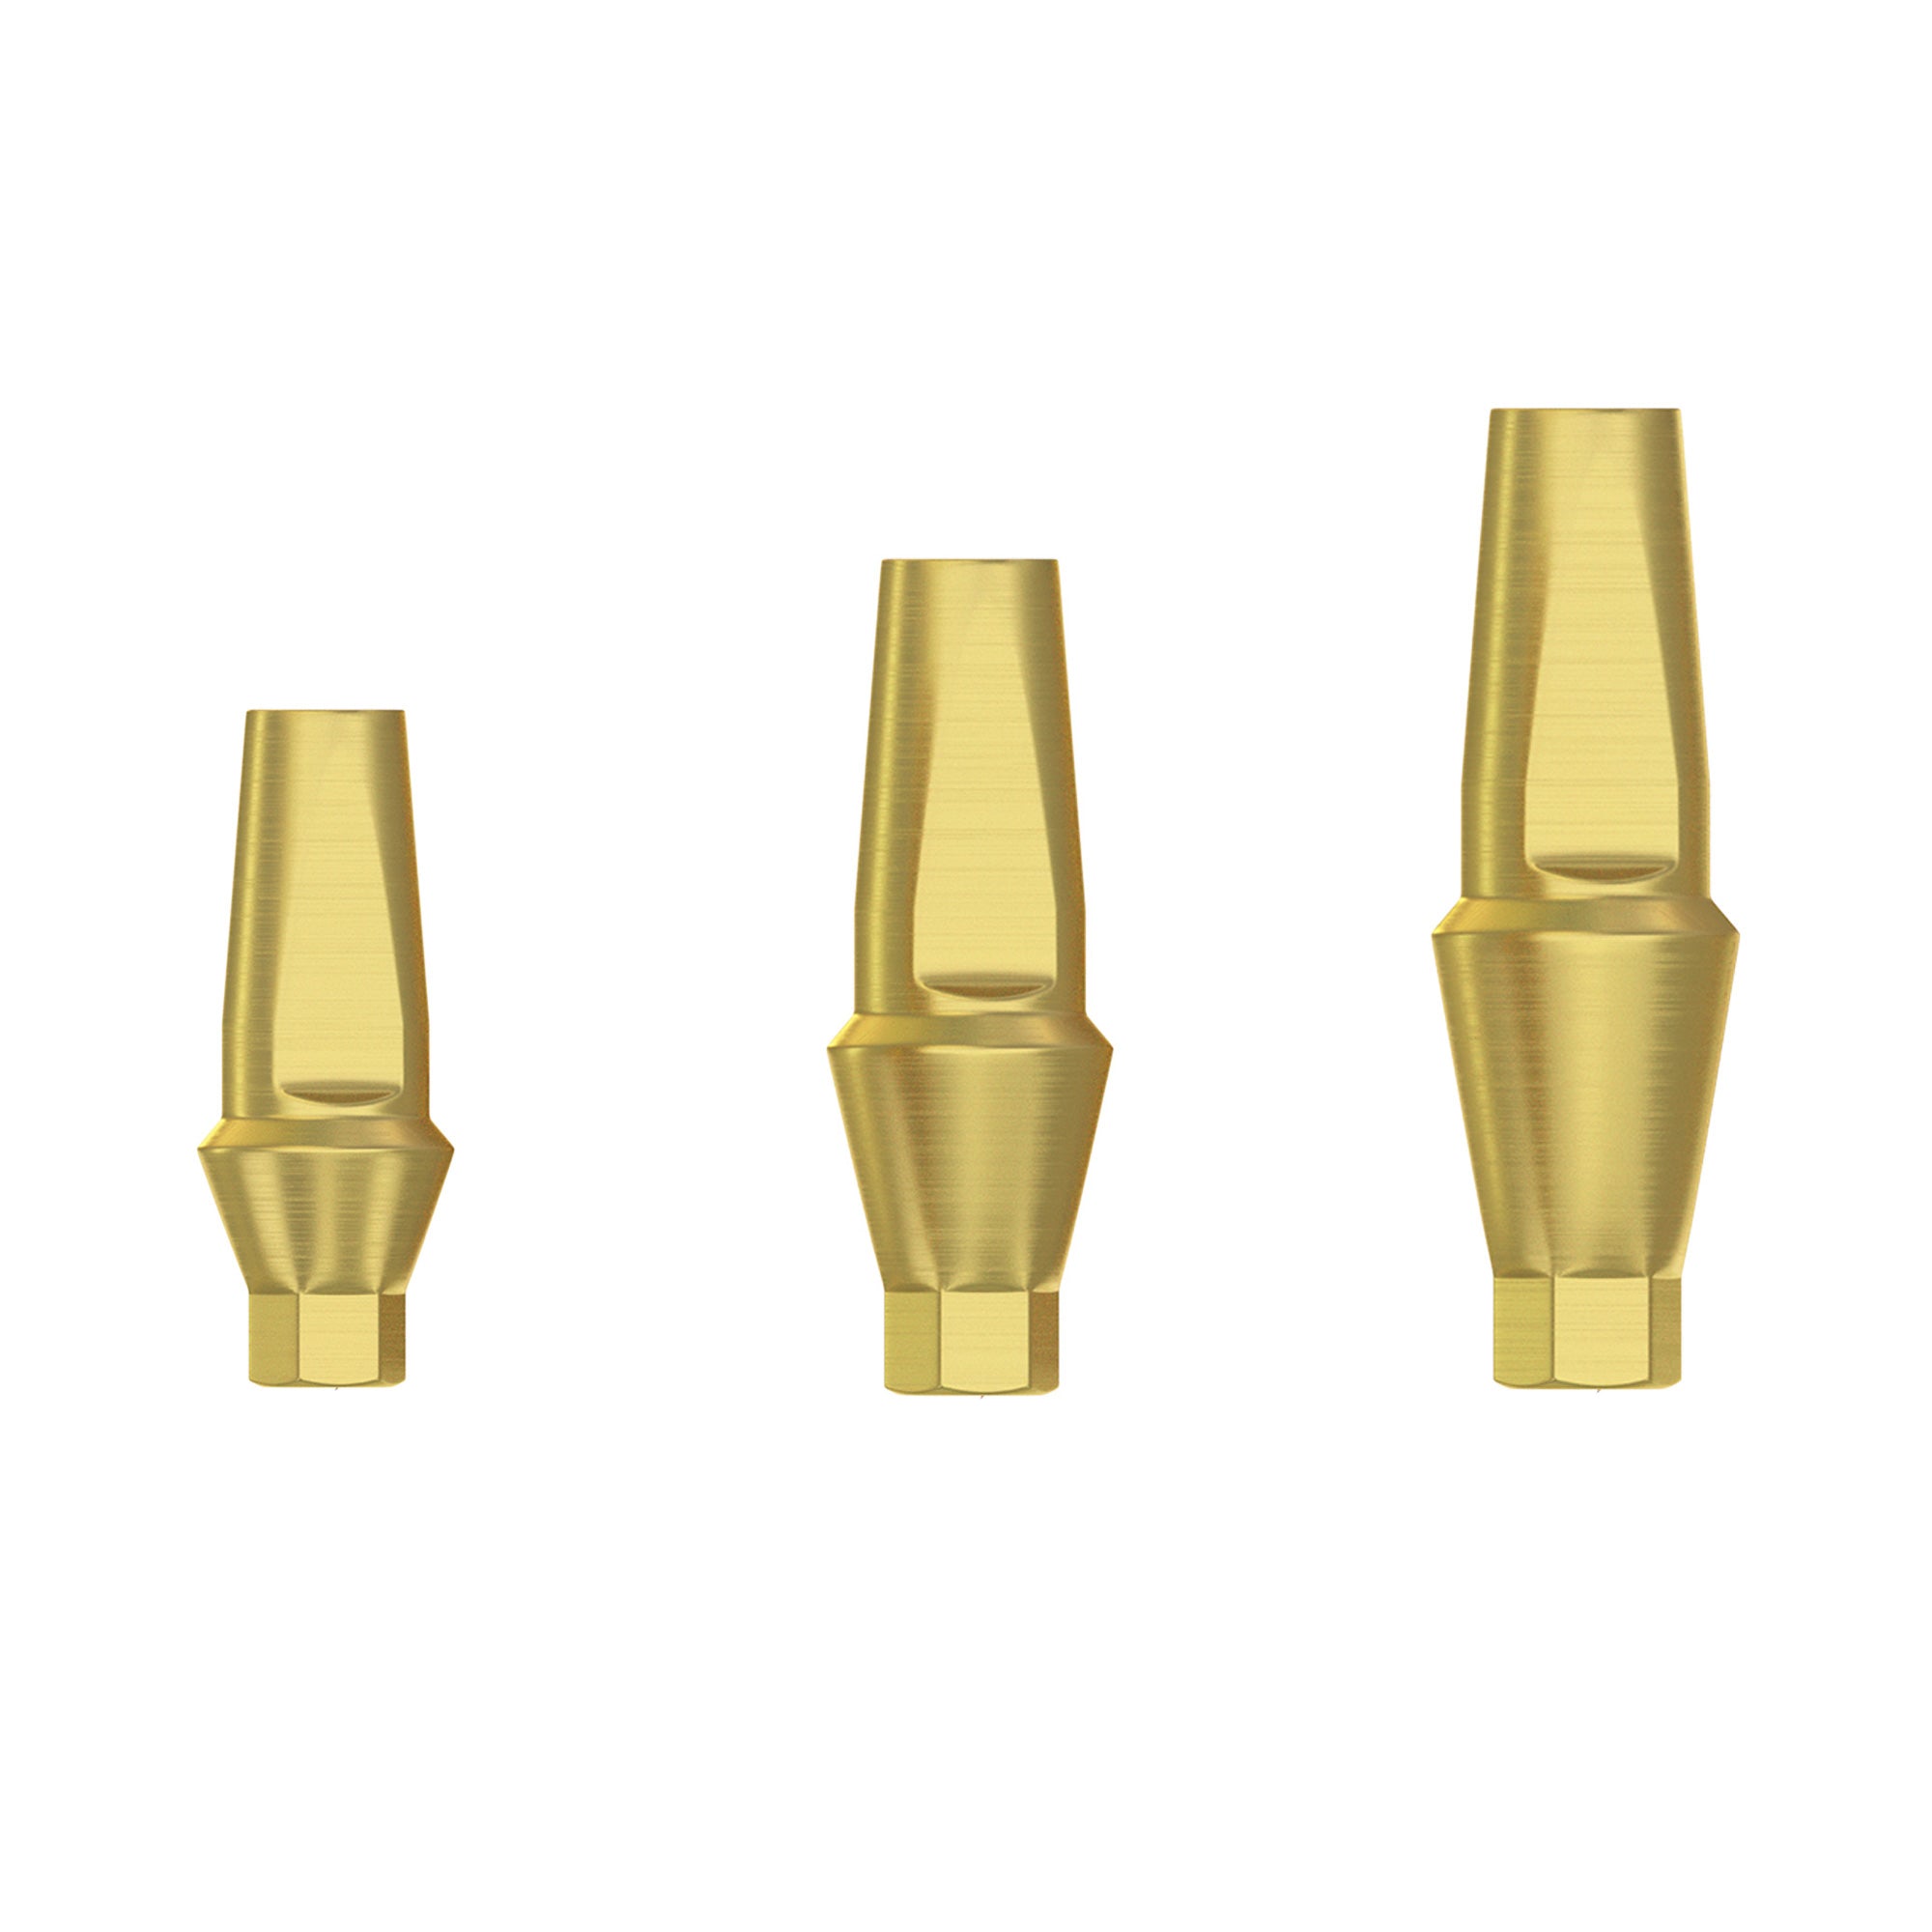 DSI Anatomic Straight Abutment - Conical Connection RP Ø4.3-5.0mm